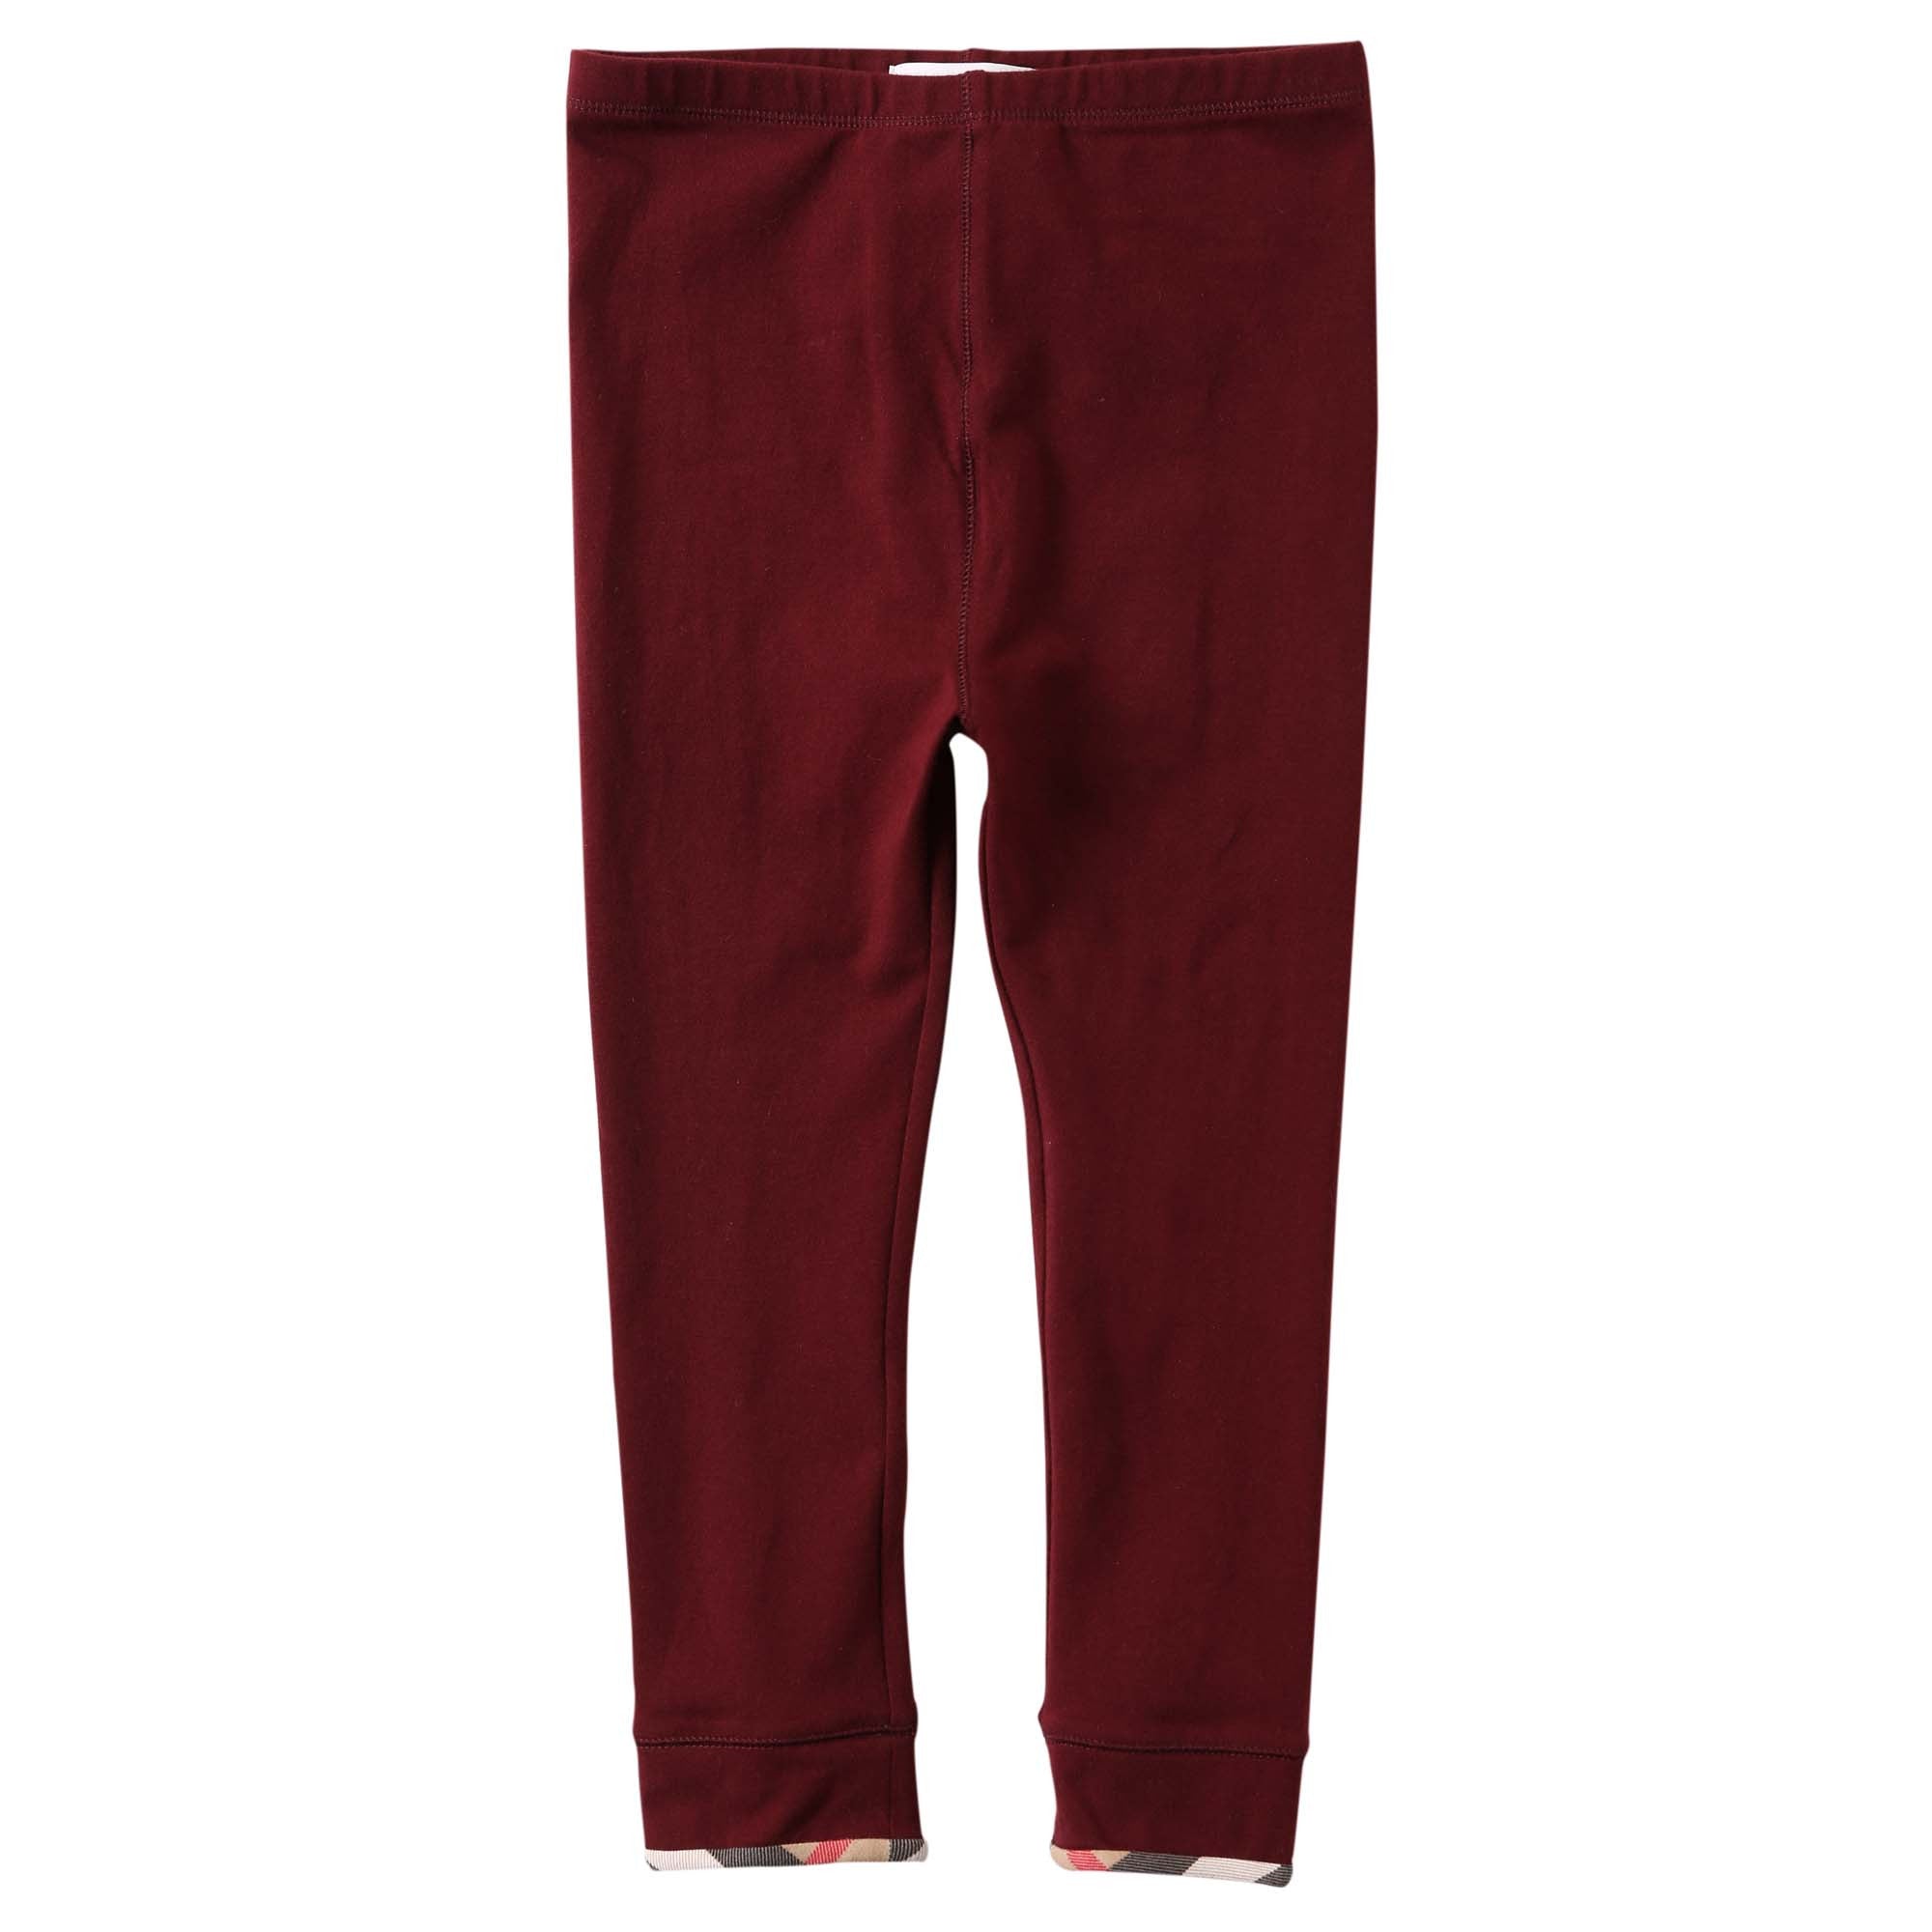 Baby Boys&Girls Deep Red Cotton Twill Chino Trousers - CÉMAROSE | Children's Fashion Store - 1